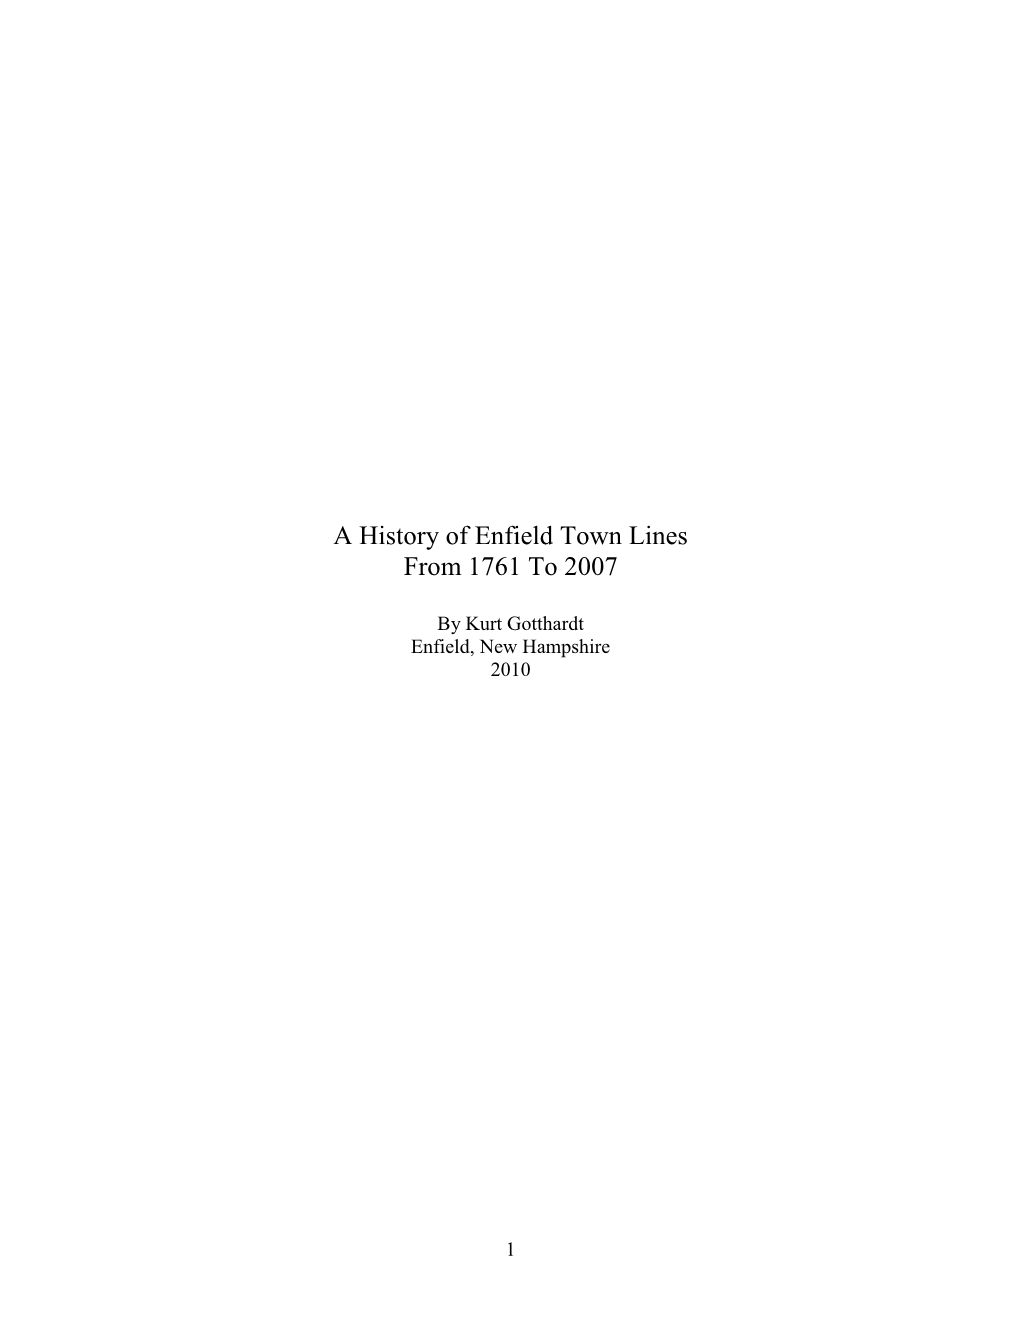 A History of Enfield Town Lines from 1761 to 2007